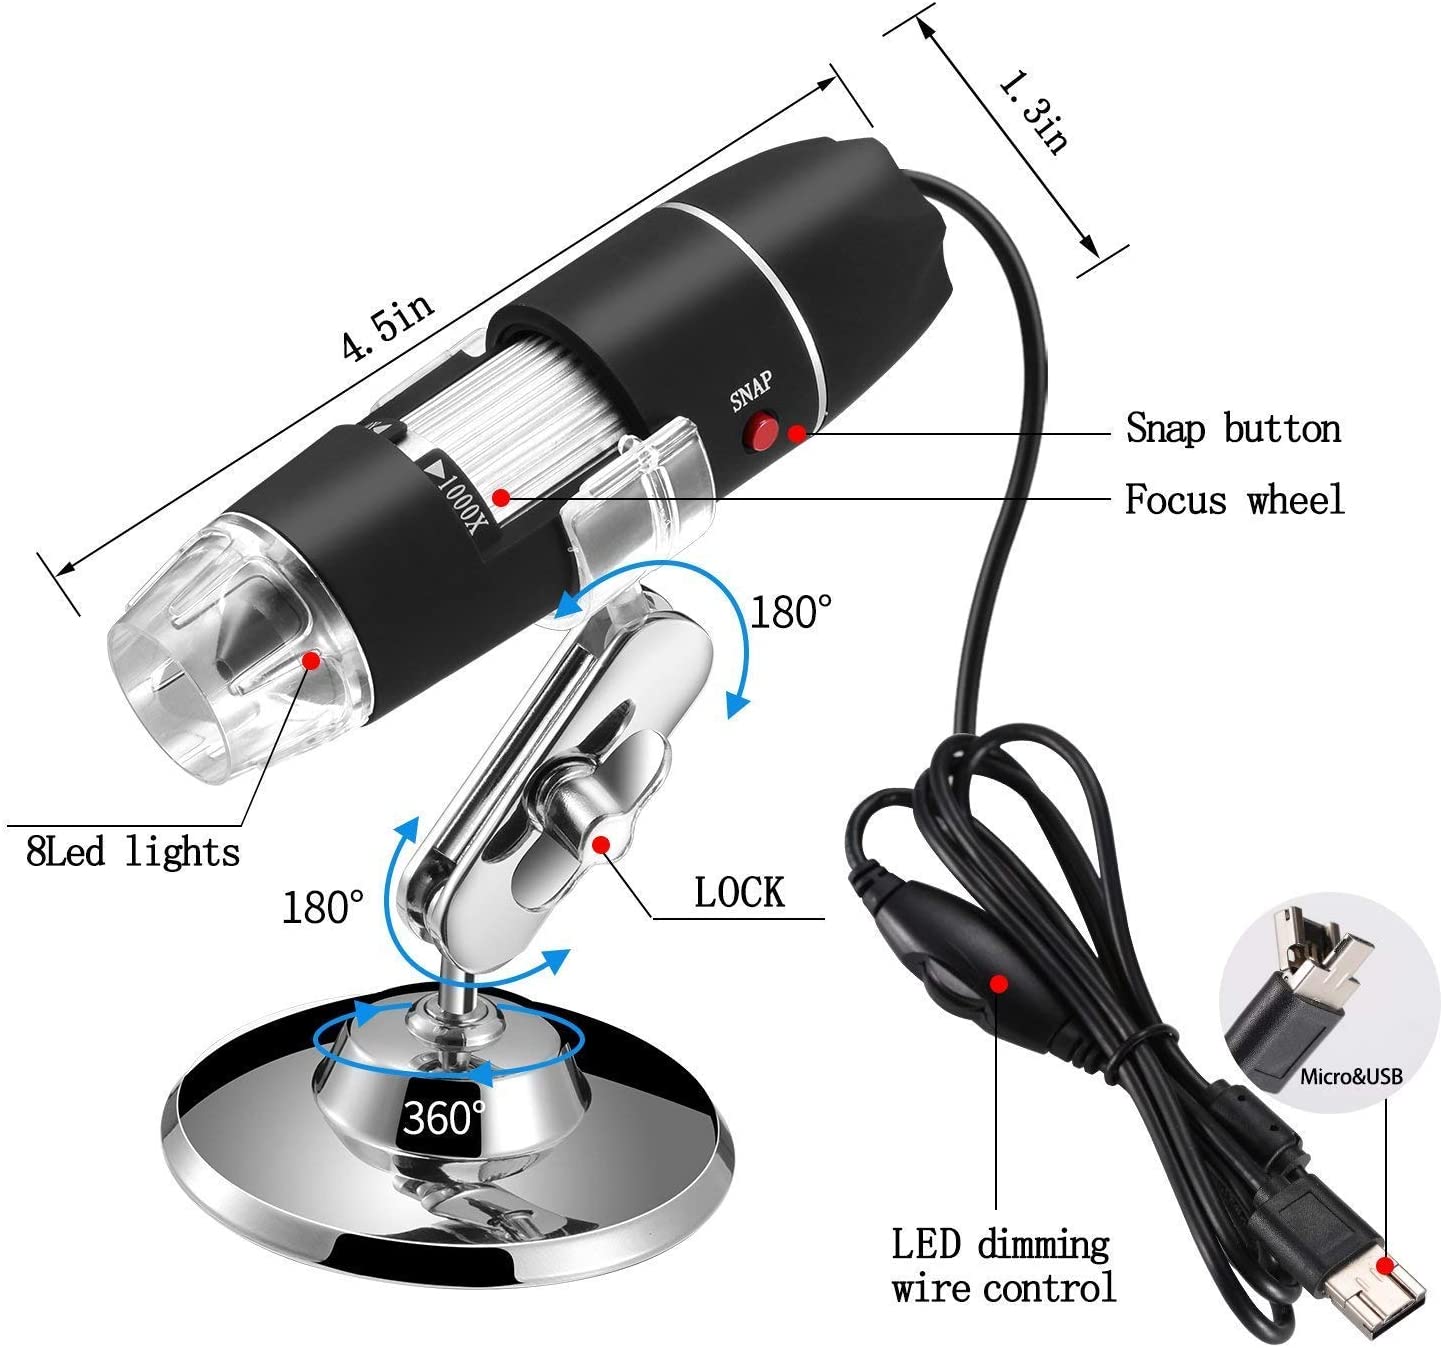 Jiusion 40 to 1000x Magnification Endoscope, 8 LED USB 2.0 Digital Microscope, Mini Camera with OTG Adapter and Metal Stand, Compatible with Mac Windows 7 8 10 11 Android Linux